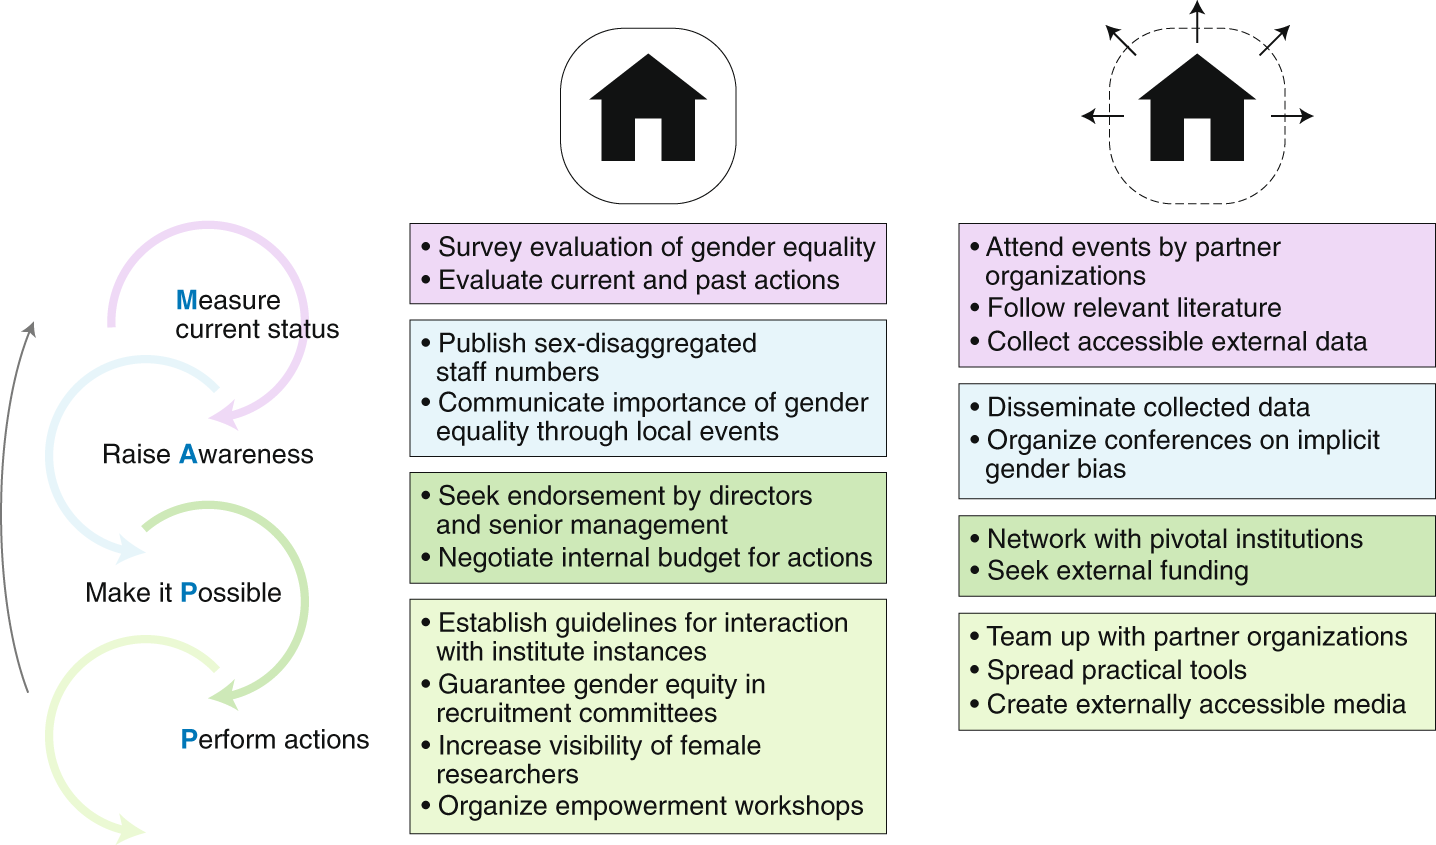 A neuroscientific approach to increase gender equality | Nature Human  Behaviour